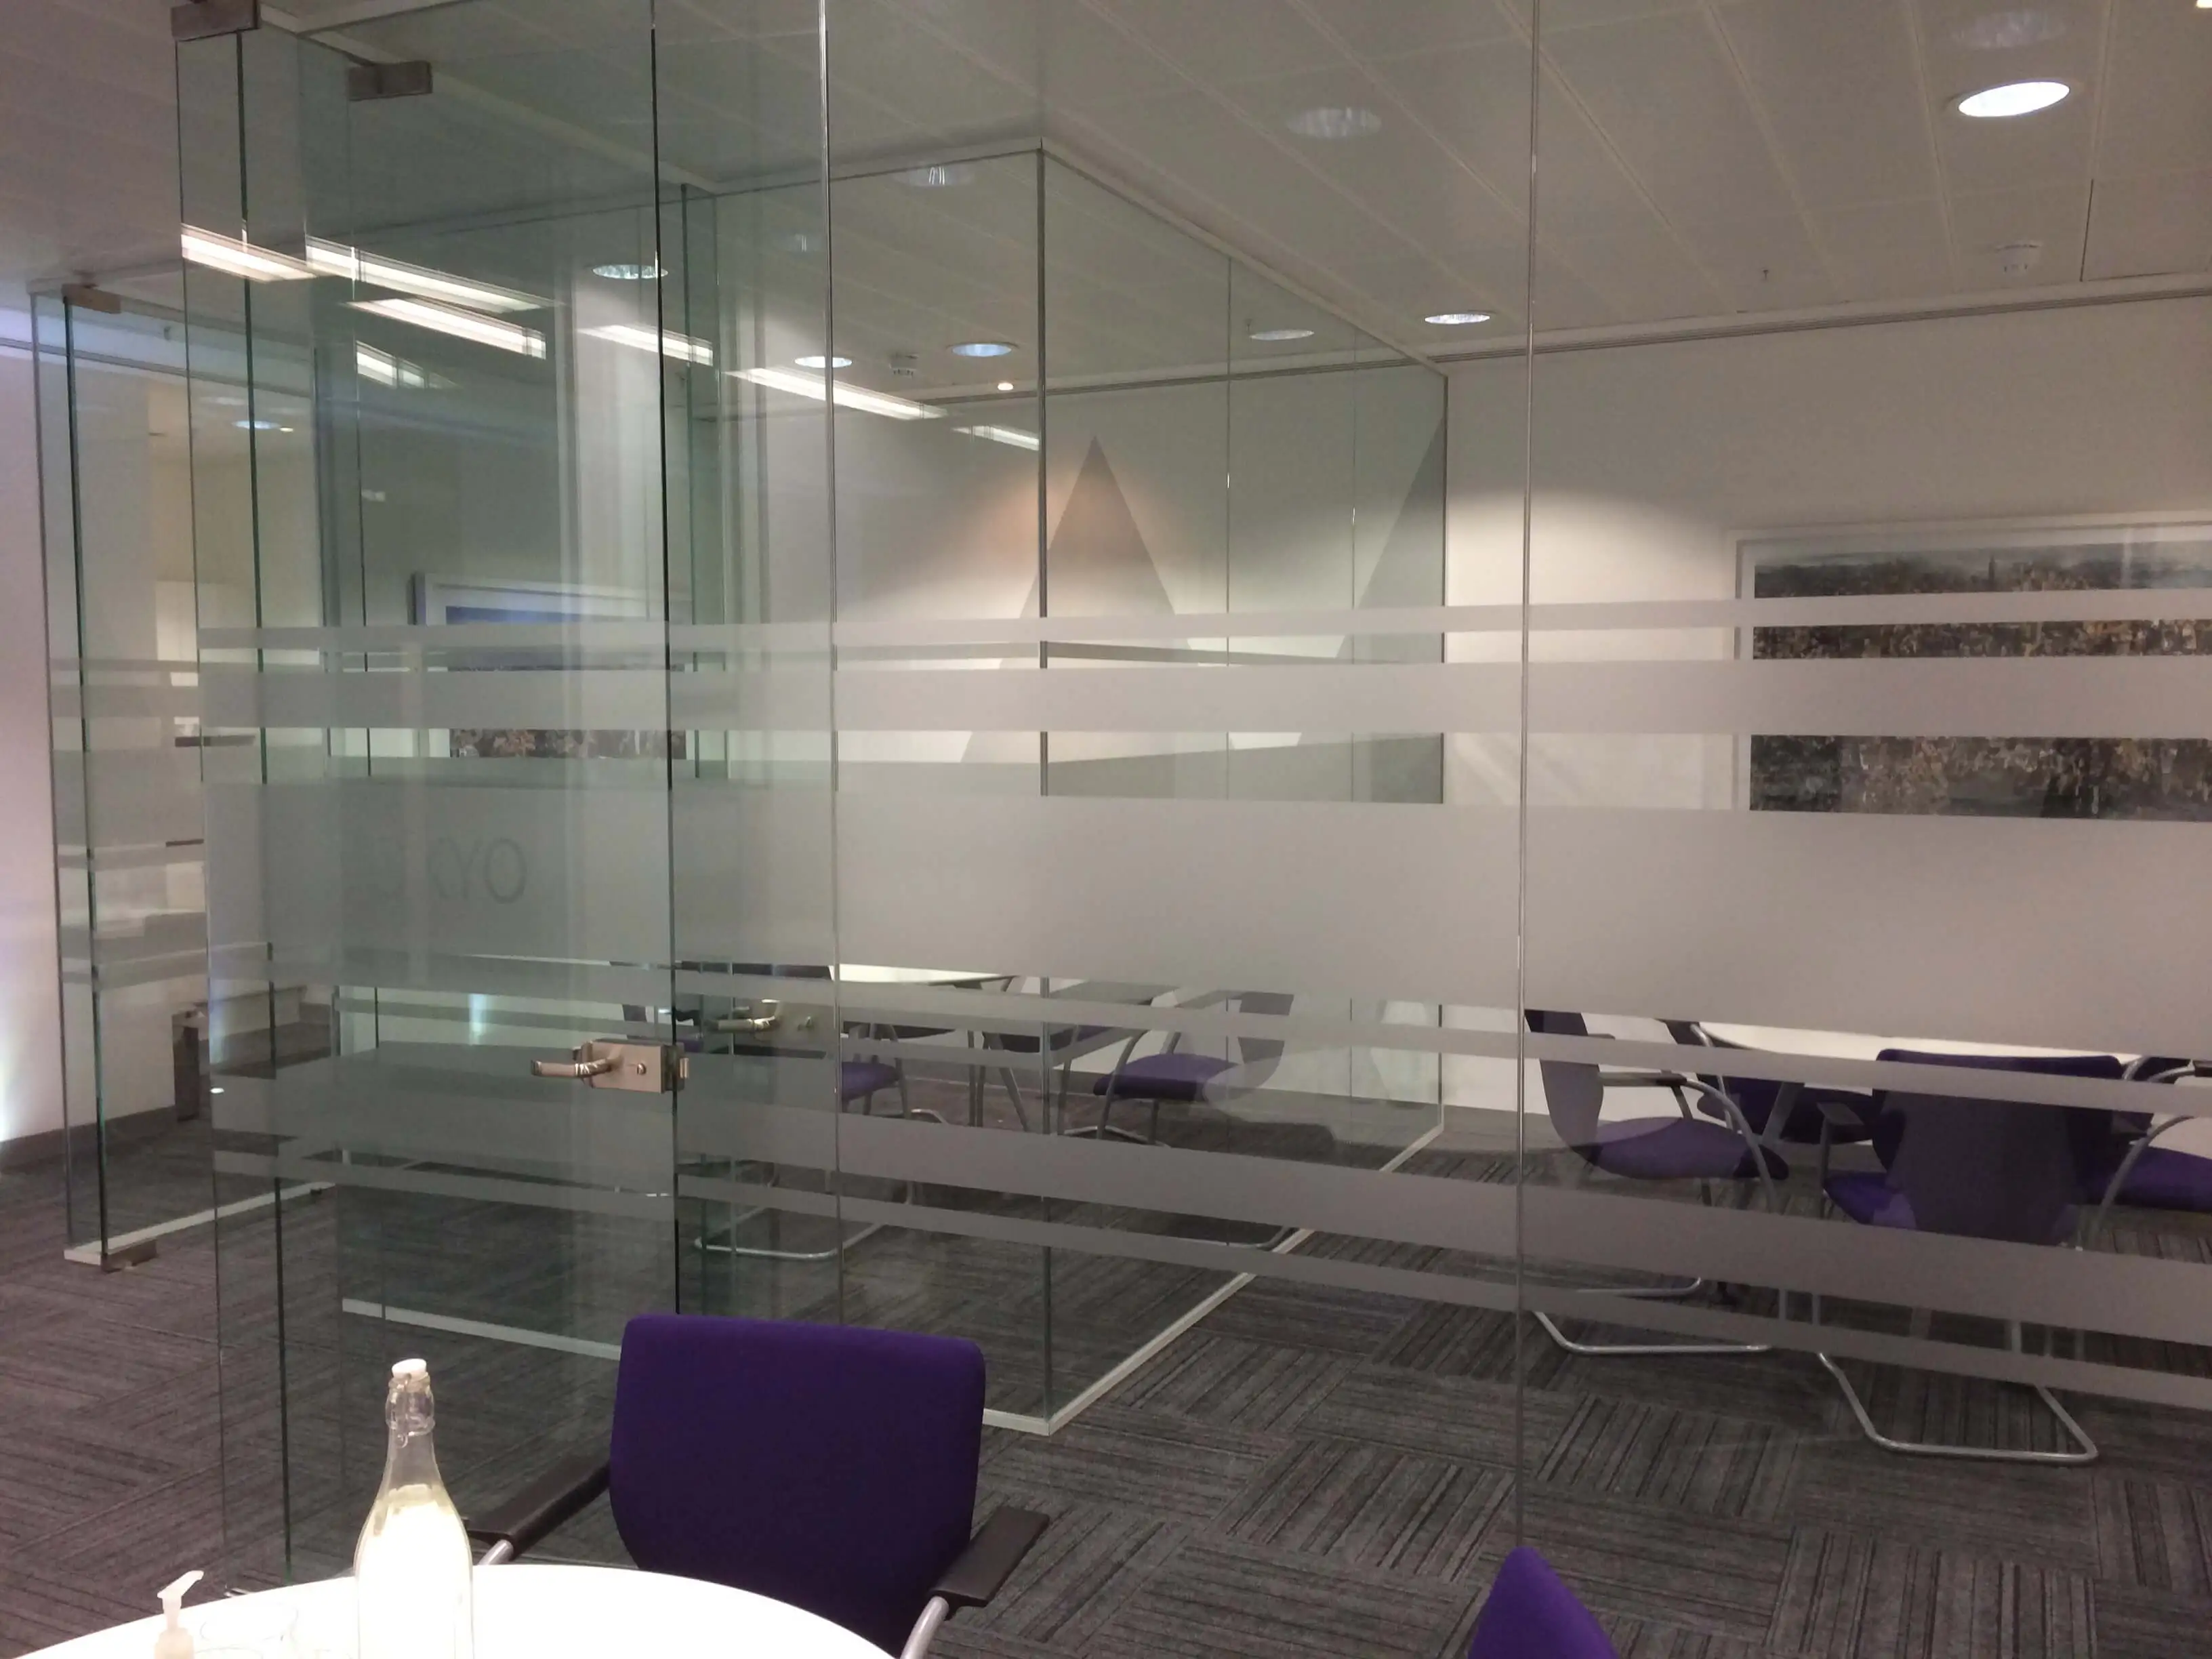 Meeting spaces with several frameless glass partitions